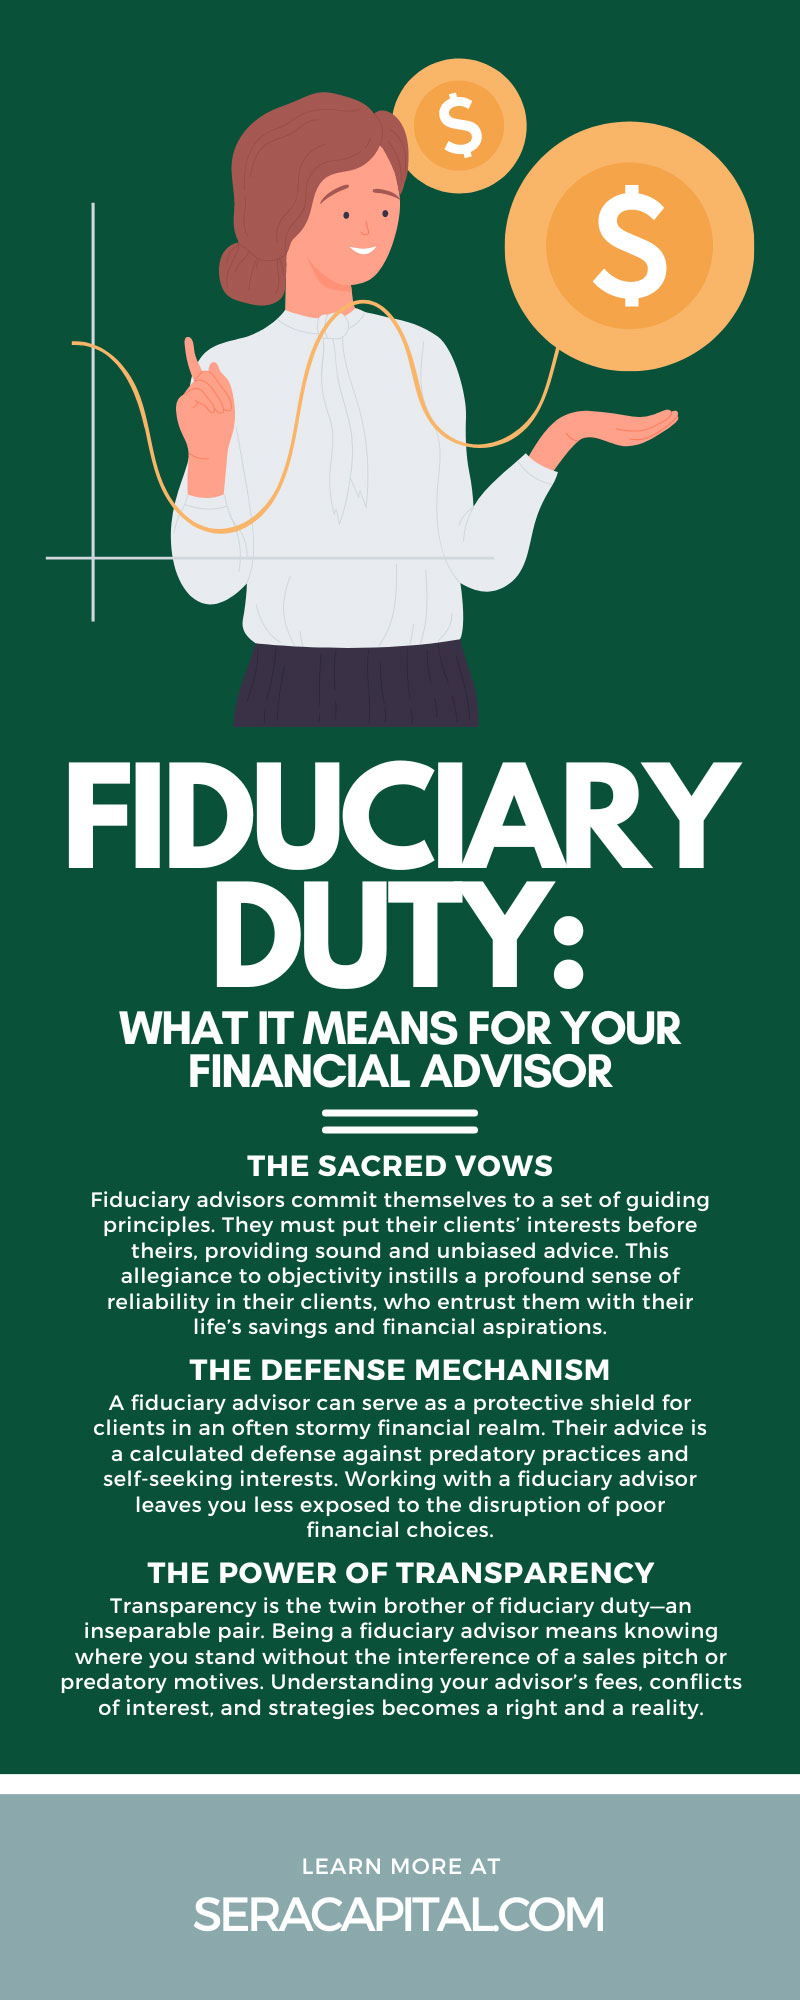 Fiduciary Duty: What It Means for Your Financial Advisor